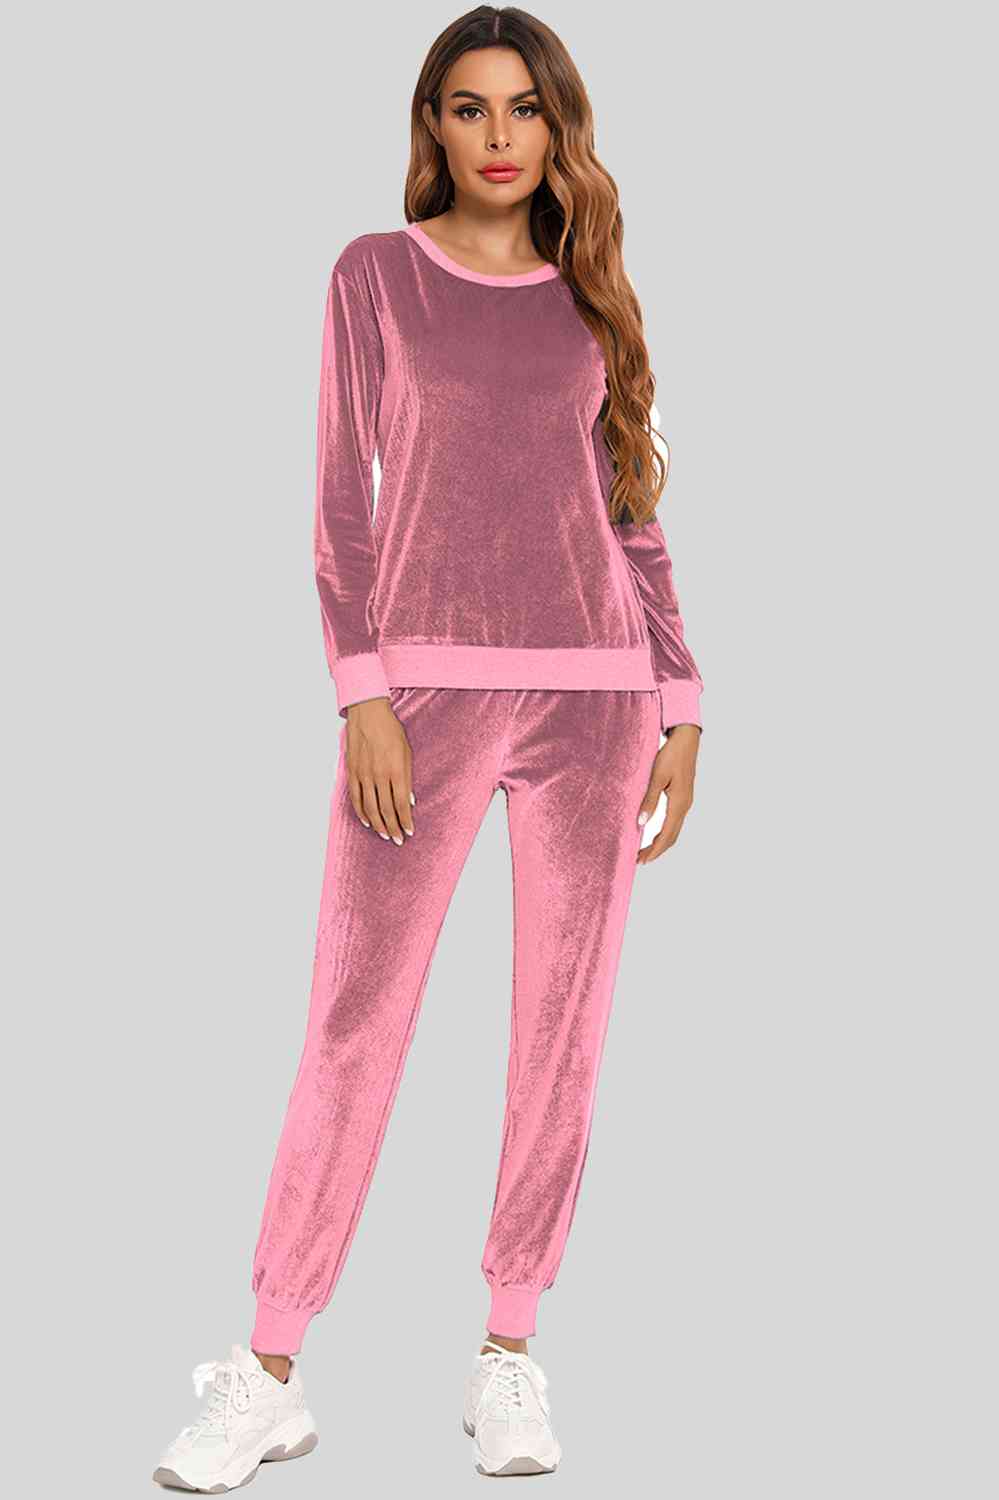 Round Neck Long Sleeve Loungewear Set with Pockets (3 Colors) Loungewear Krazy Heart Designs Boutique Dusty Pink S 